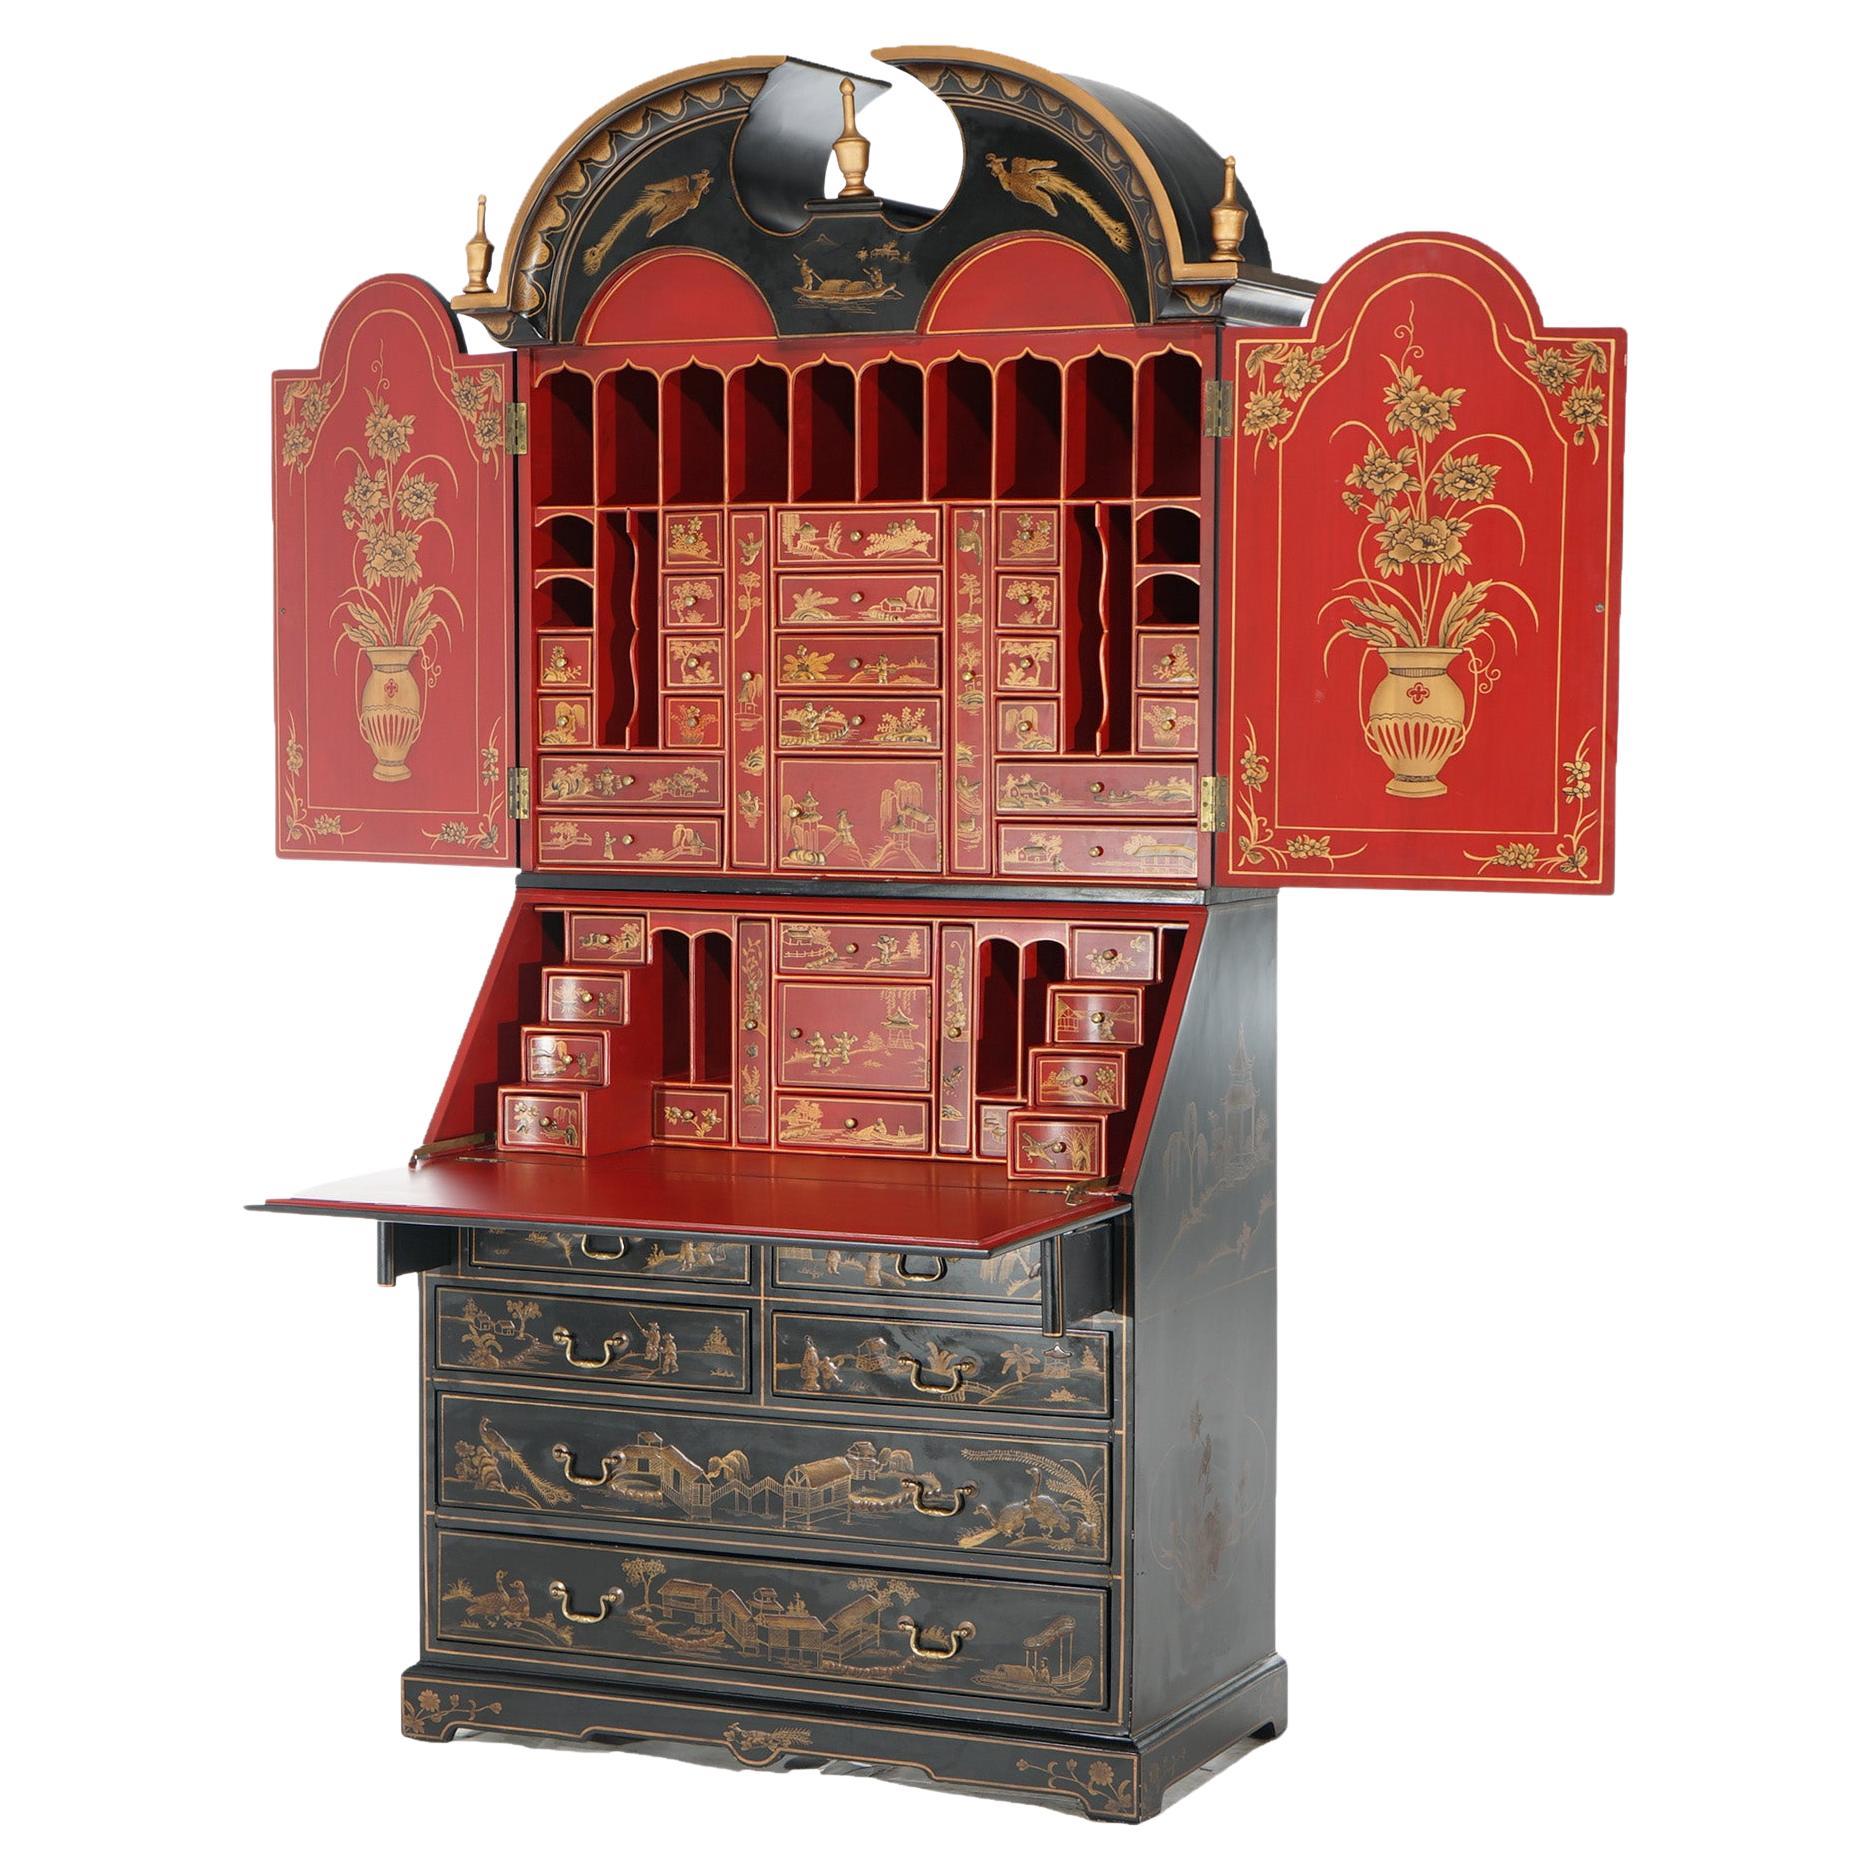 A Chinoiserie decorated secretary offers black lacquered wood construction with upper having a broken arch pediment over a cast with double doors opening to vermillion red lacquered interior having gilt decoration and with storage drawers and pigeon